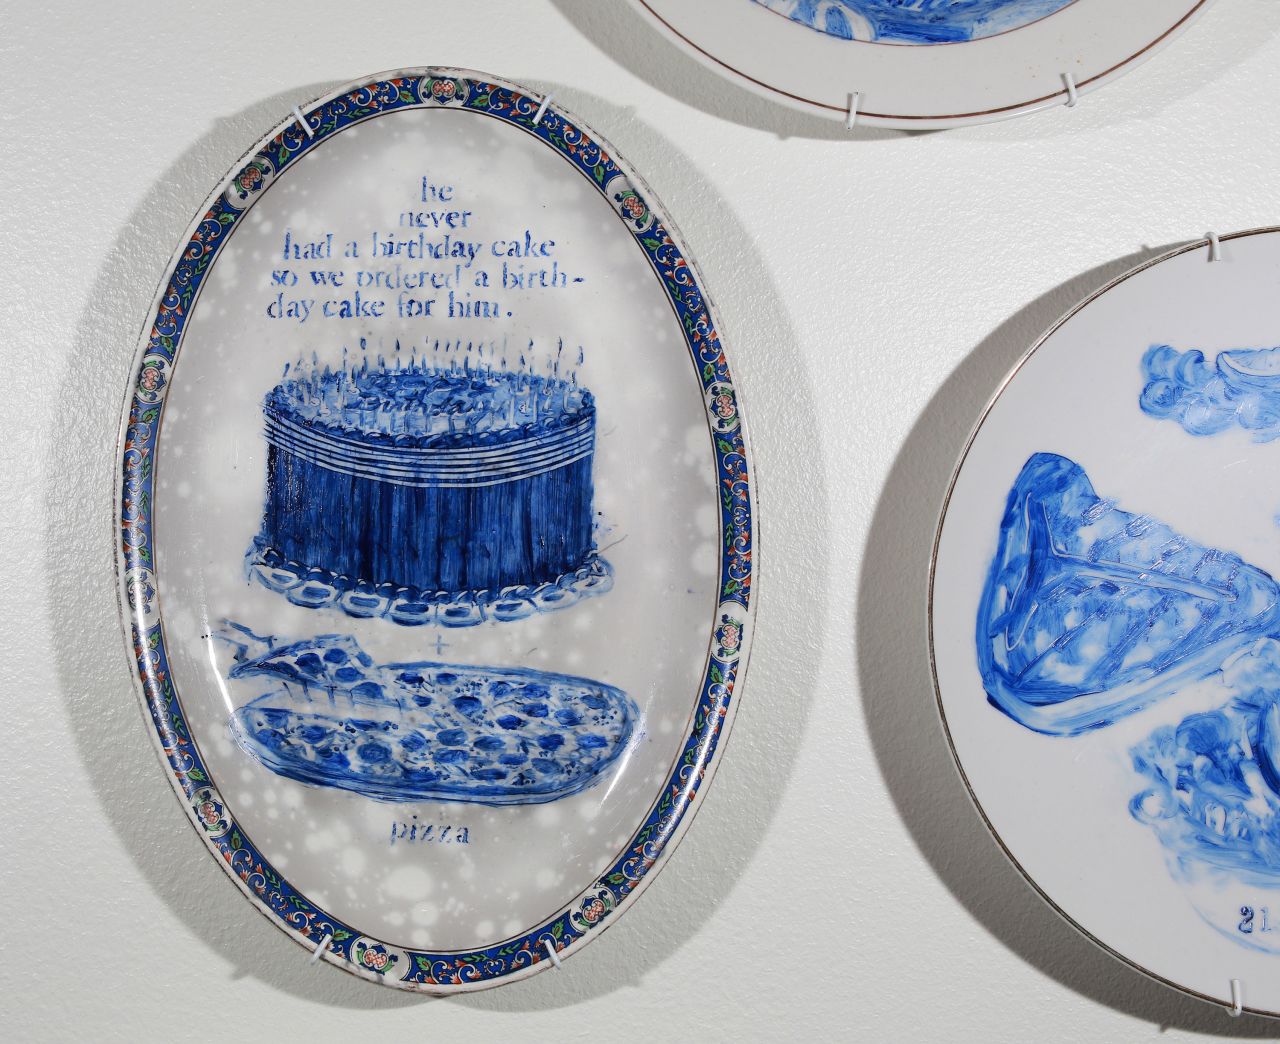 A close up of one of Julie Green's "The Last Supper" plates, showing a birthday cake given to a Death Row inmate.